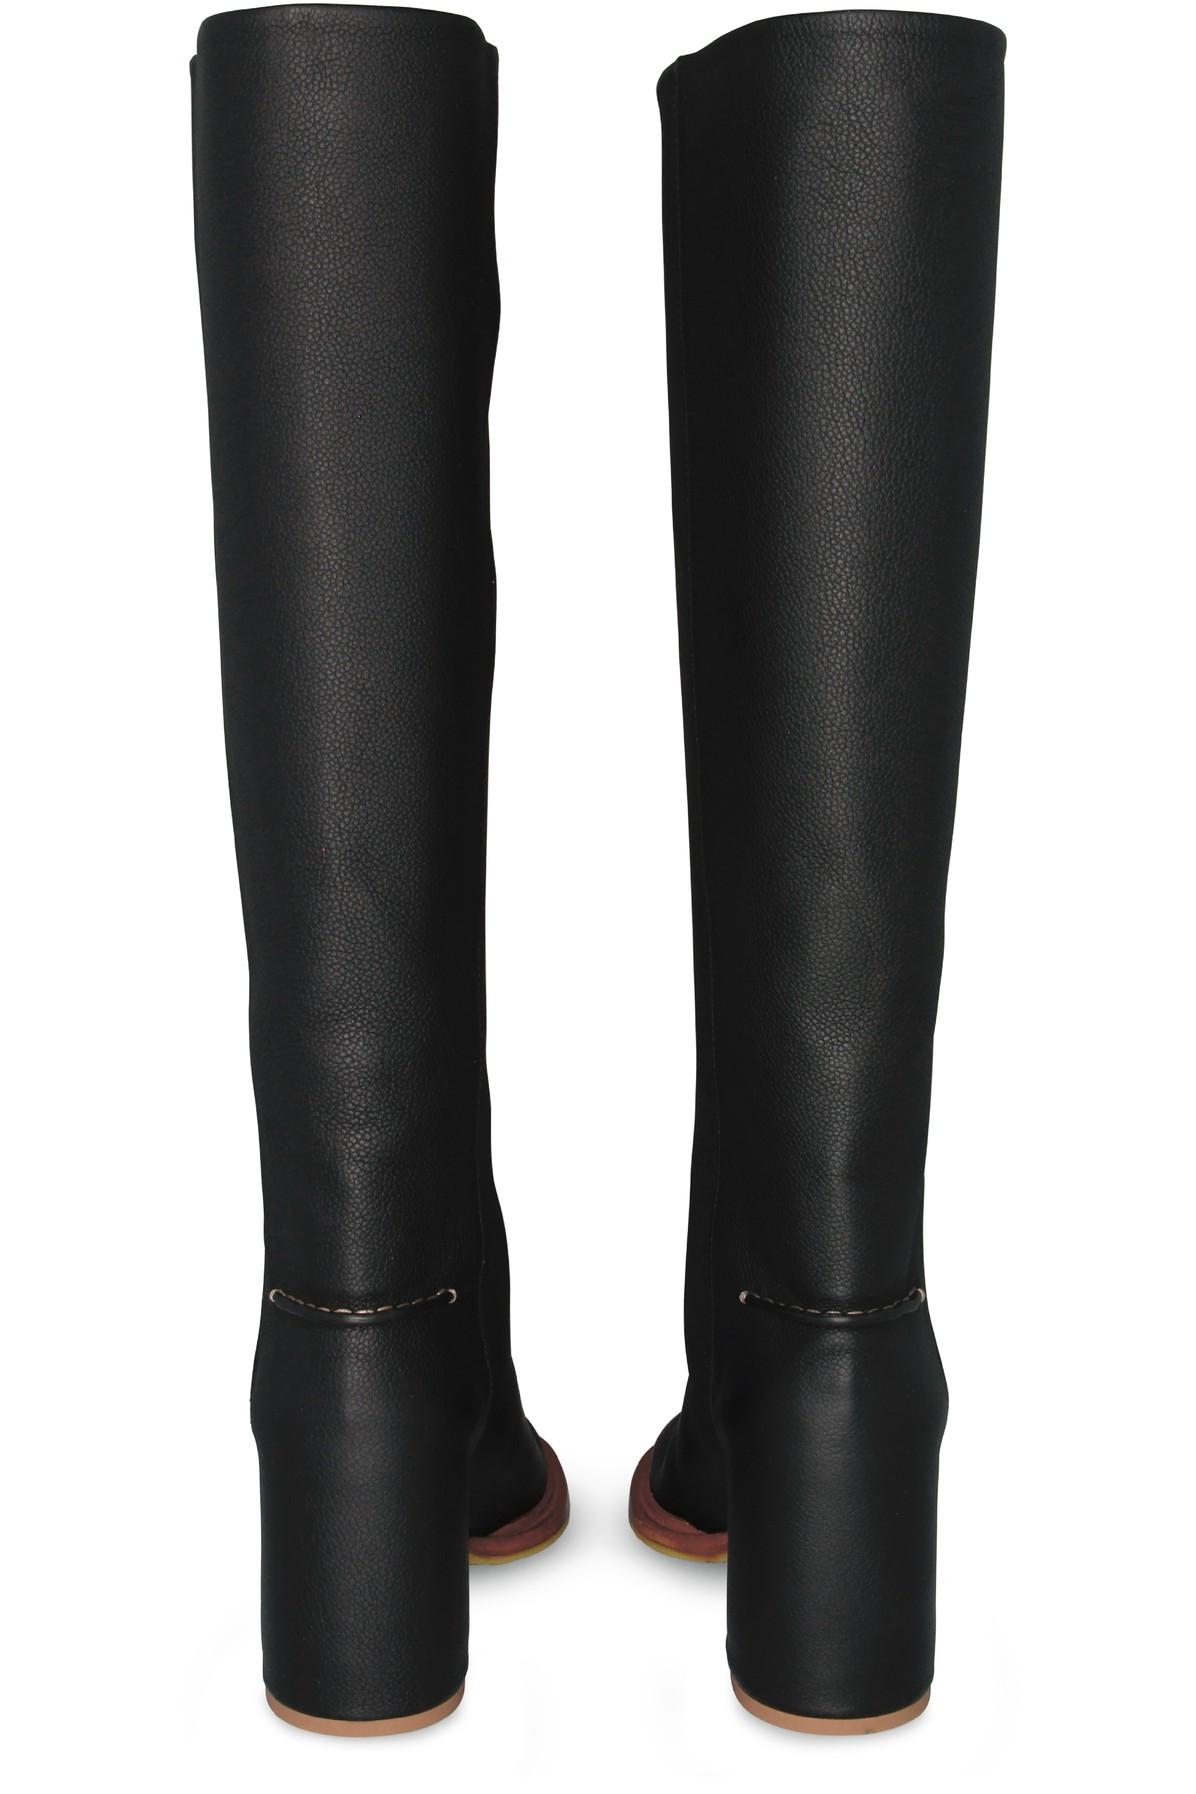 Chloé Leather Edith Boots in Black - Lyst